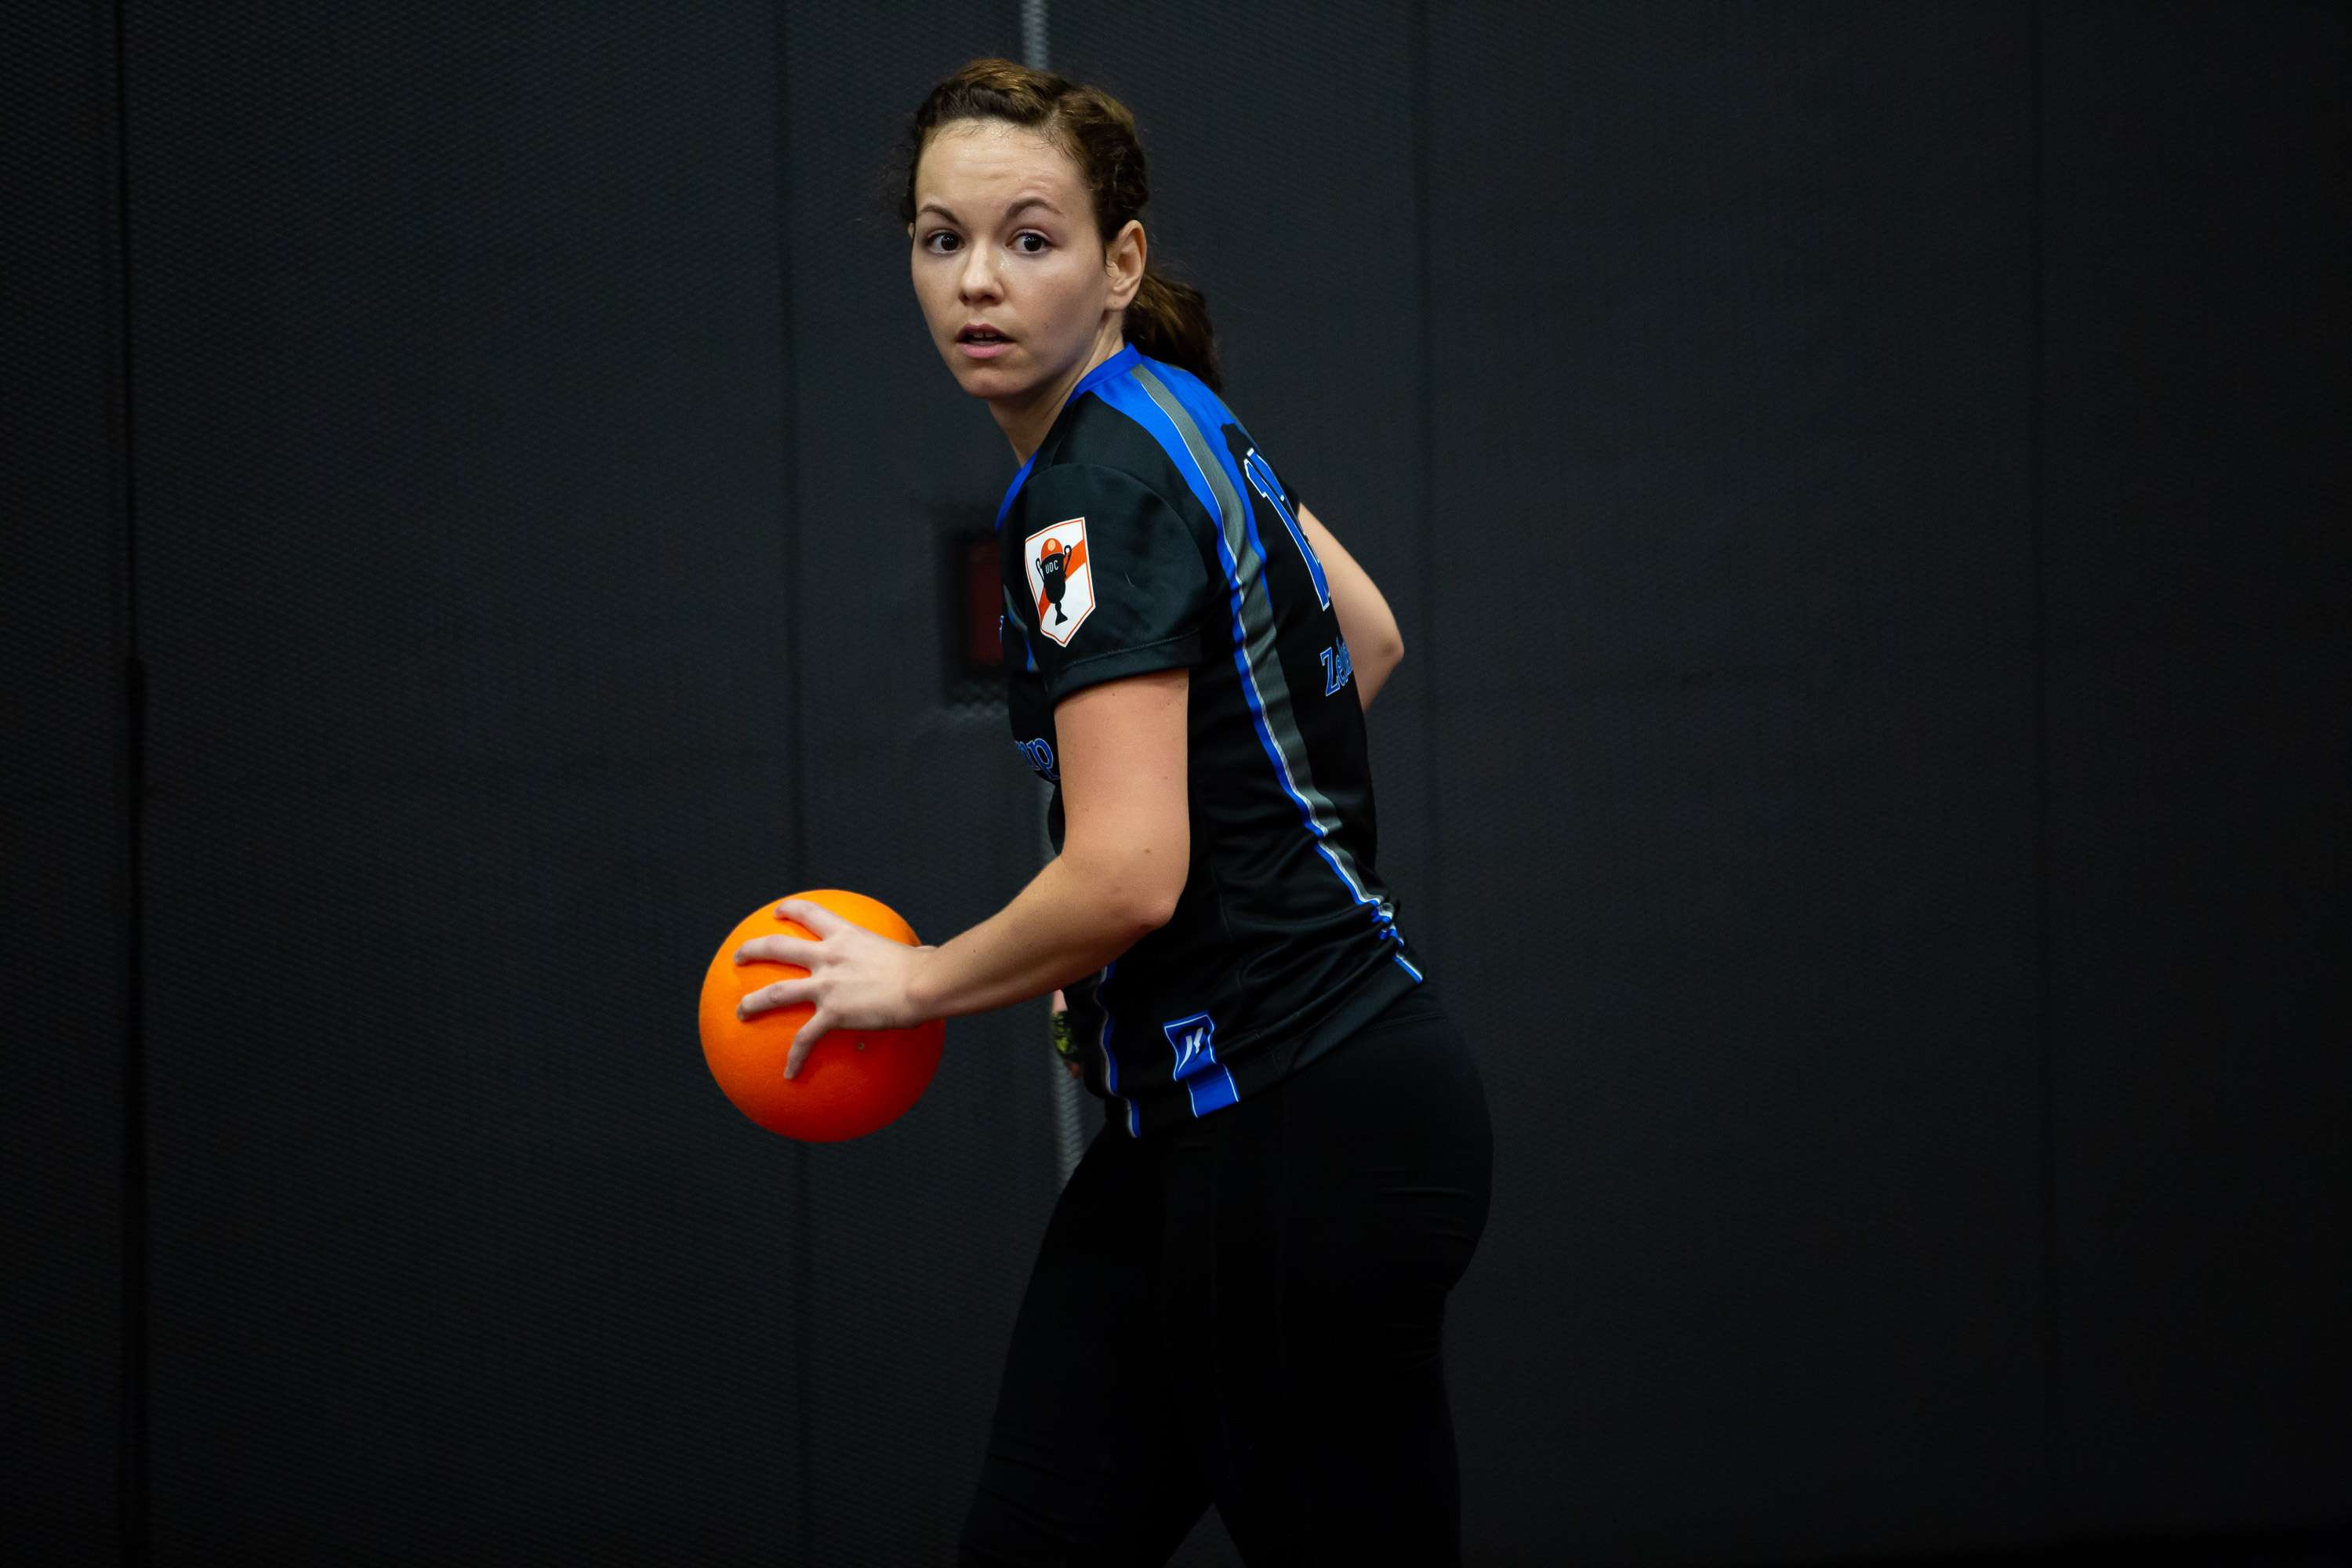 A player surveys the court while holding a ball